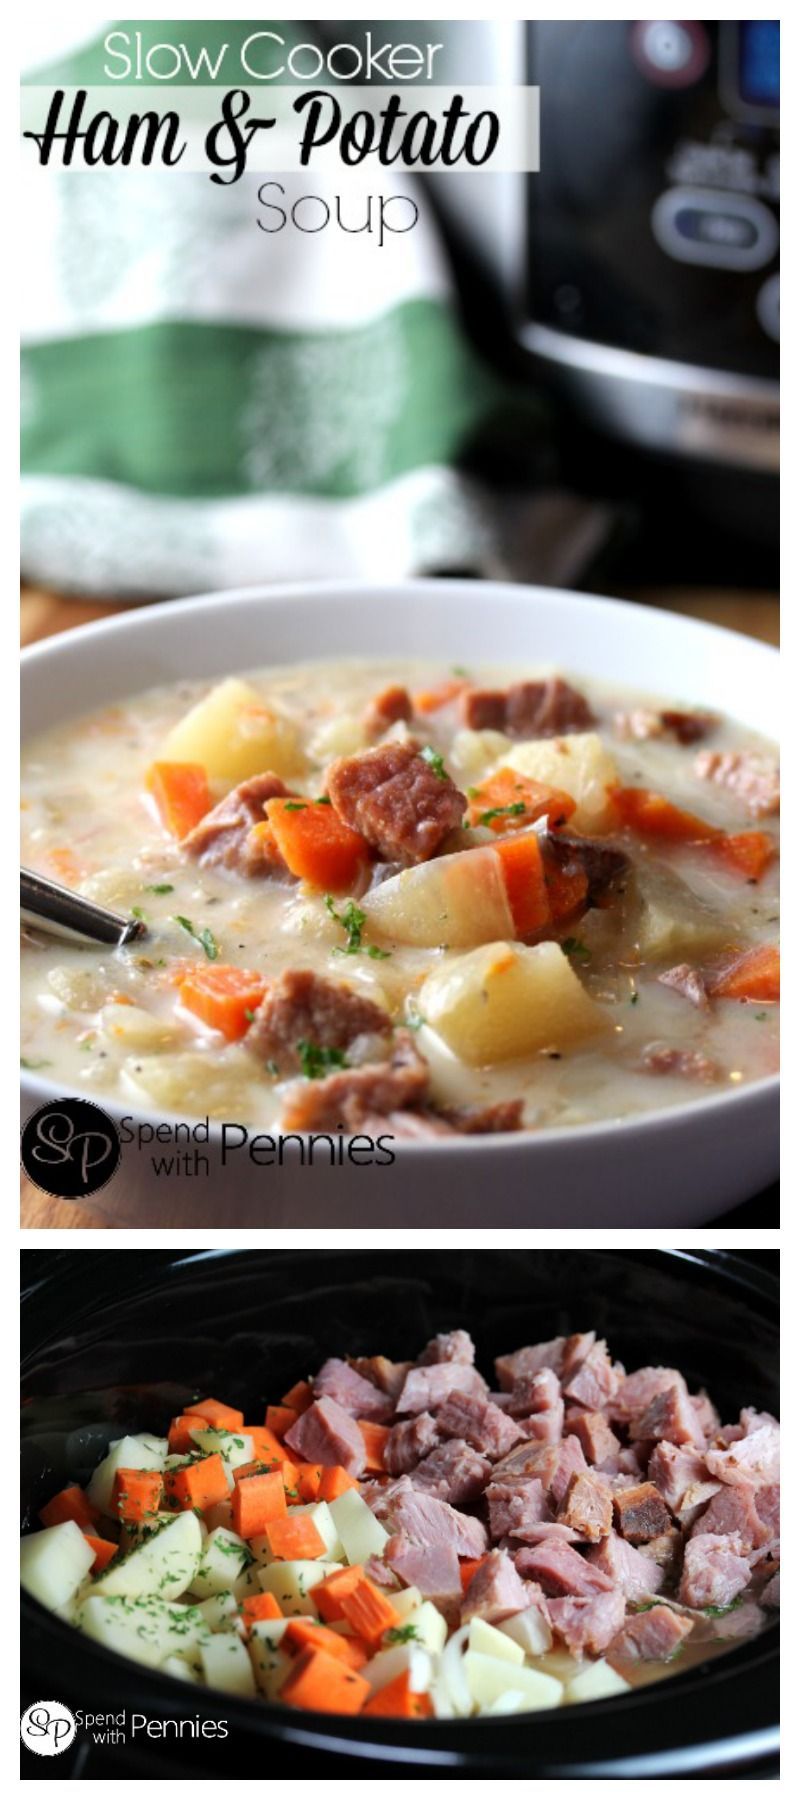 Delicious Ham & Potato soup in the slow cooker!  This is such a great meal to